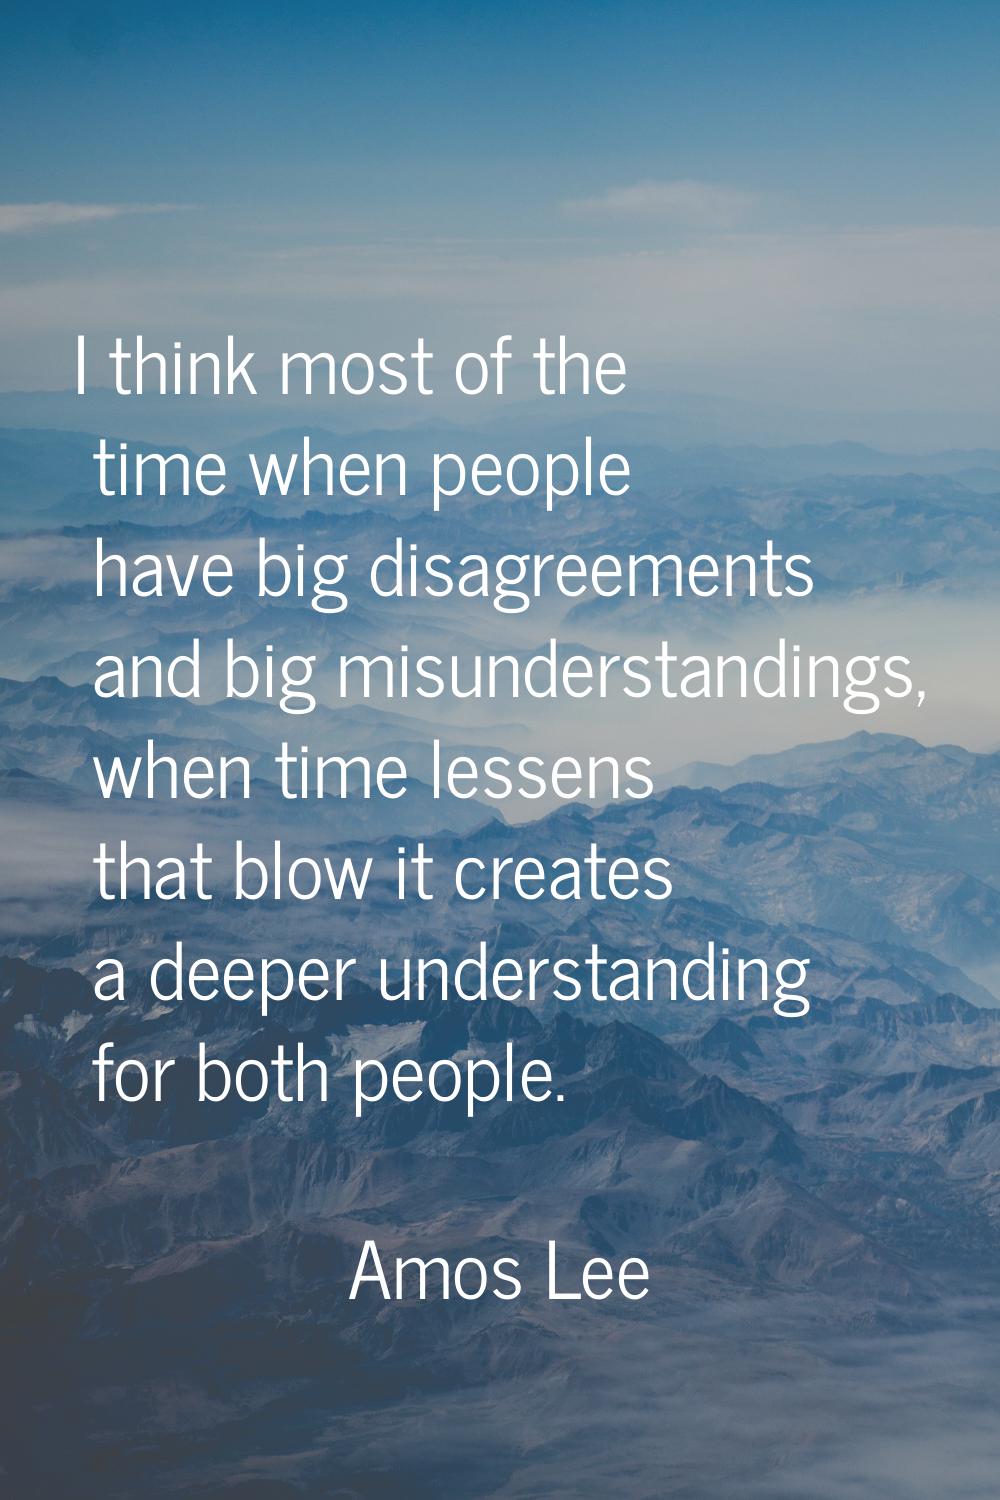 I think most of the time when people have big disagreements and big misunderstandings, when time le